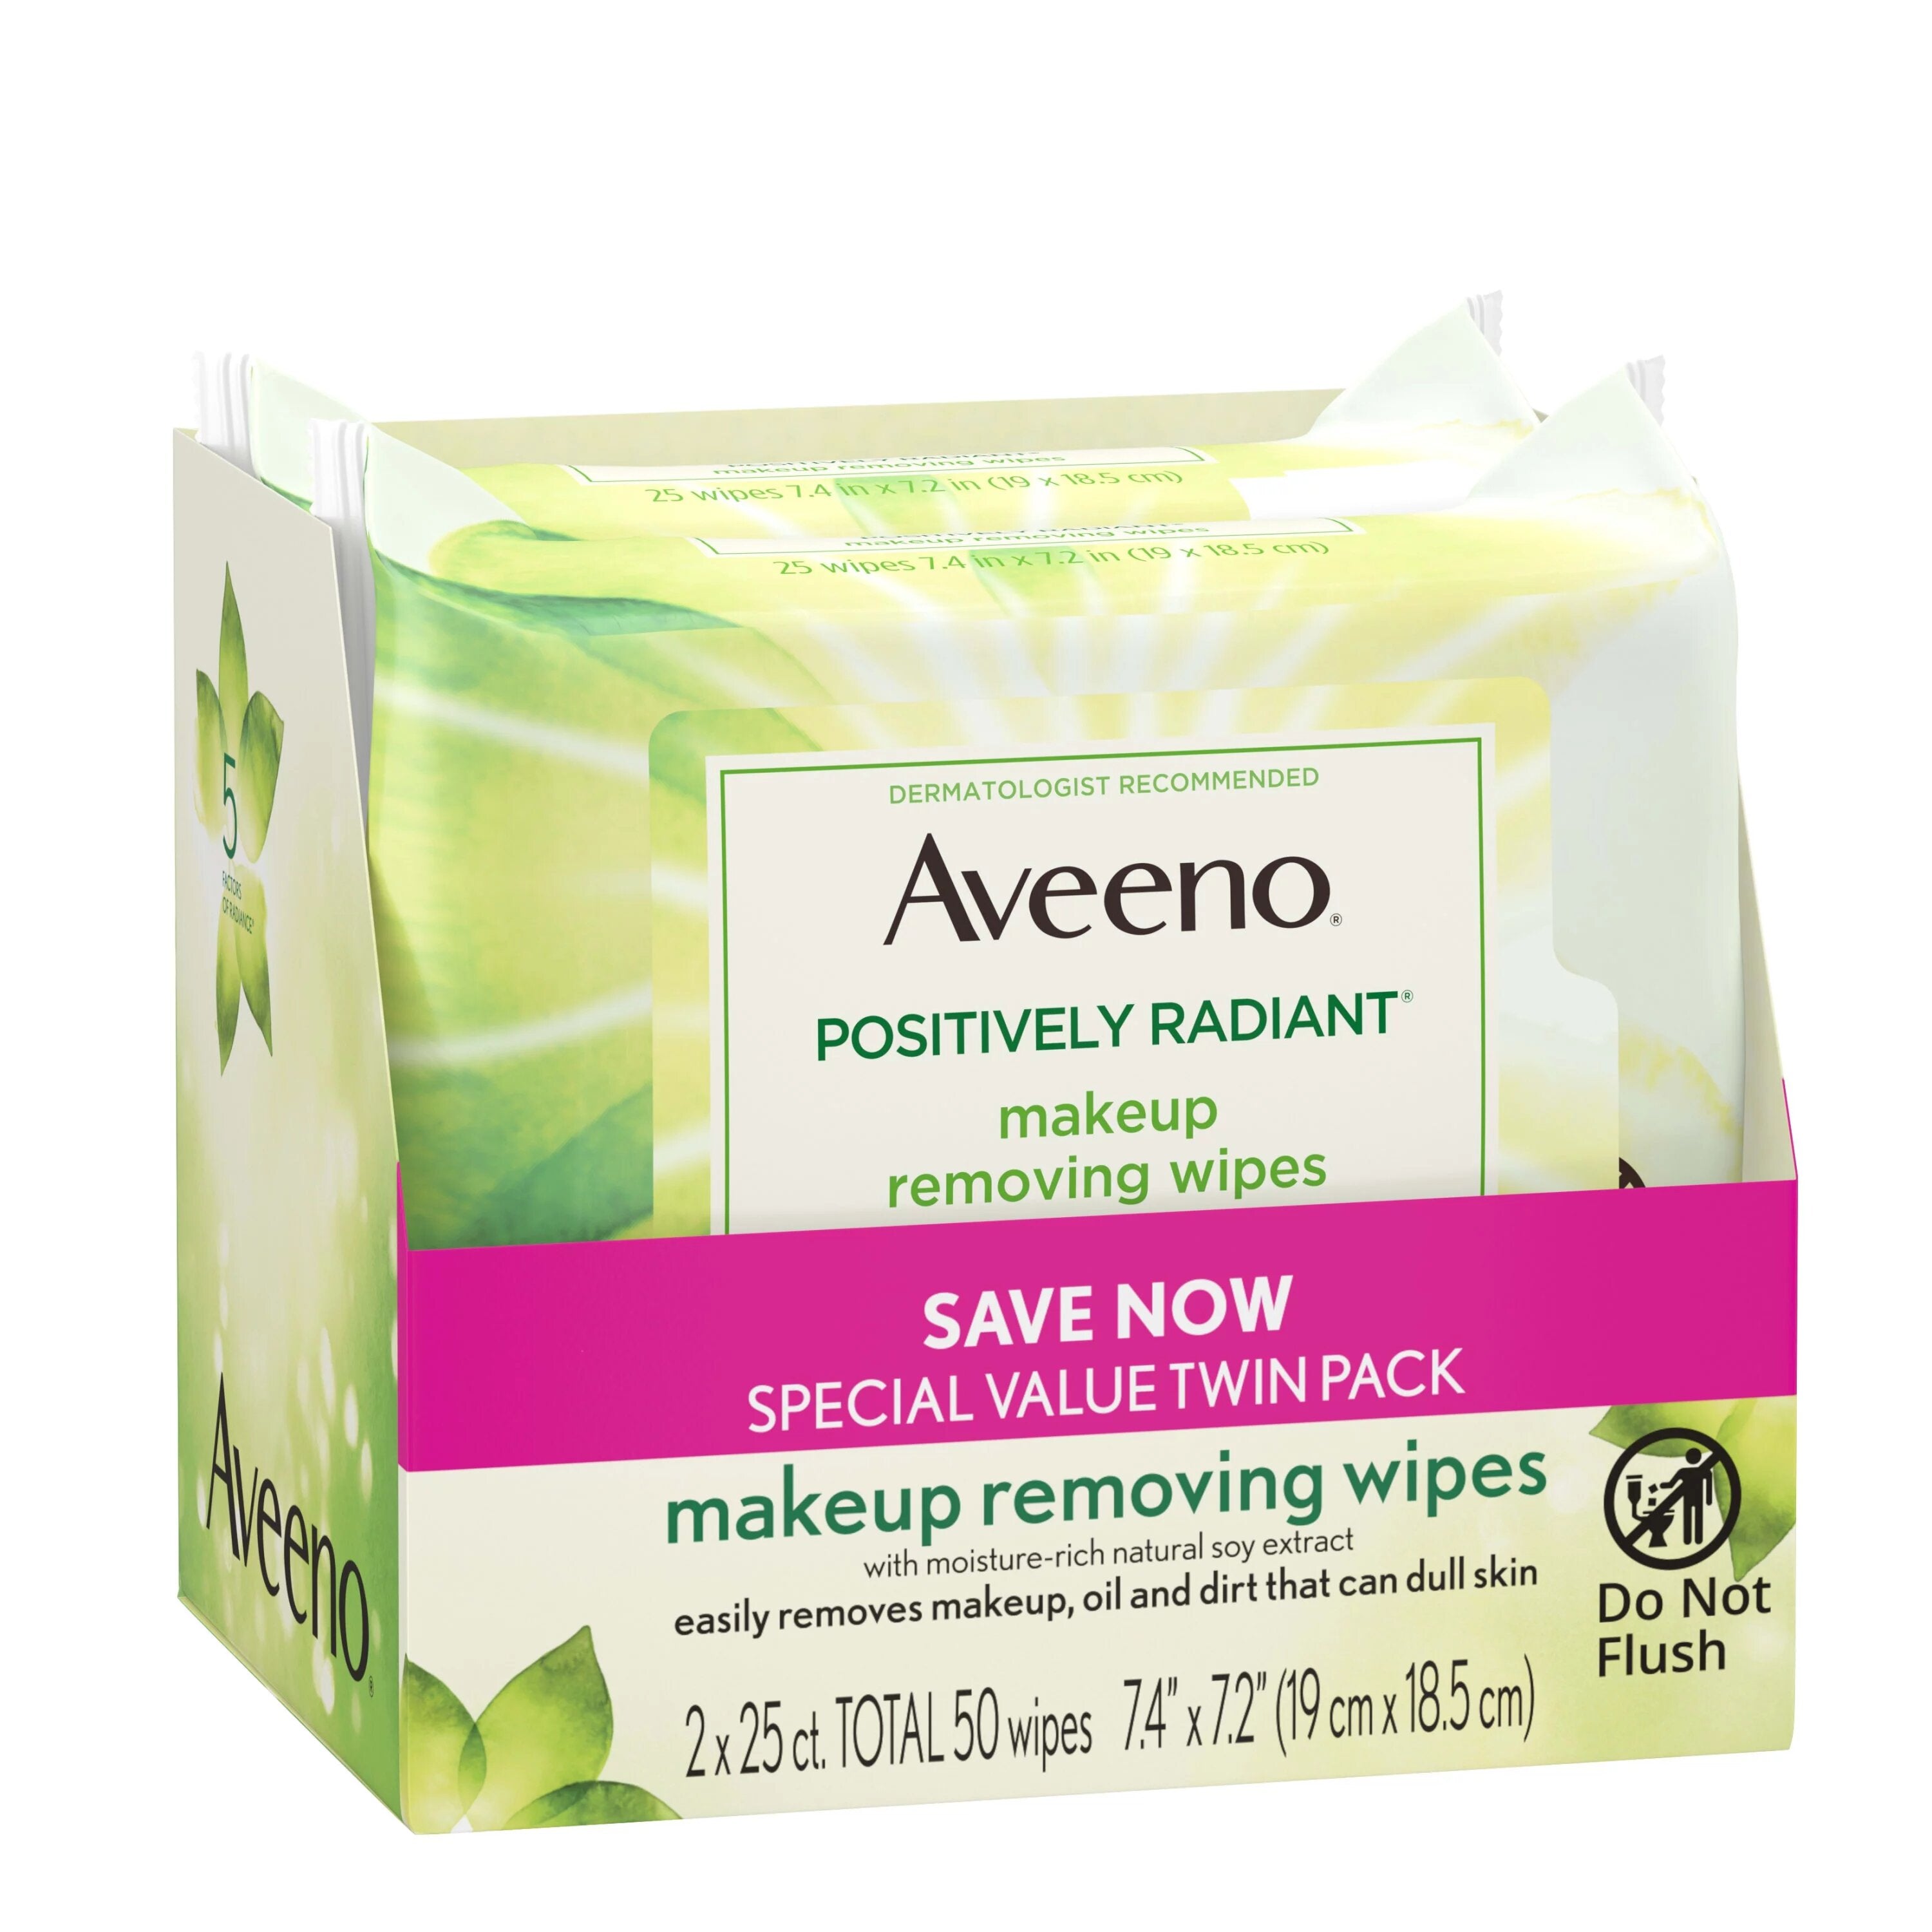 Aveeno Positively Radiant Makeup Removing Face Wipes Twin Pack - 2x25ct/12pk